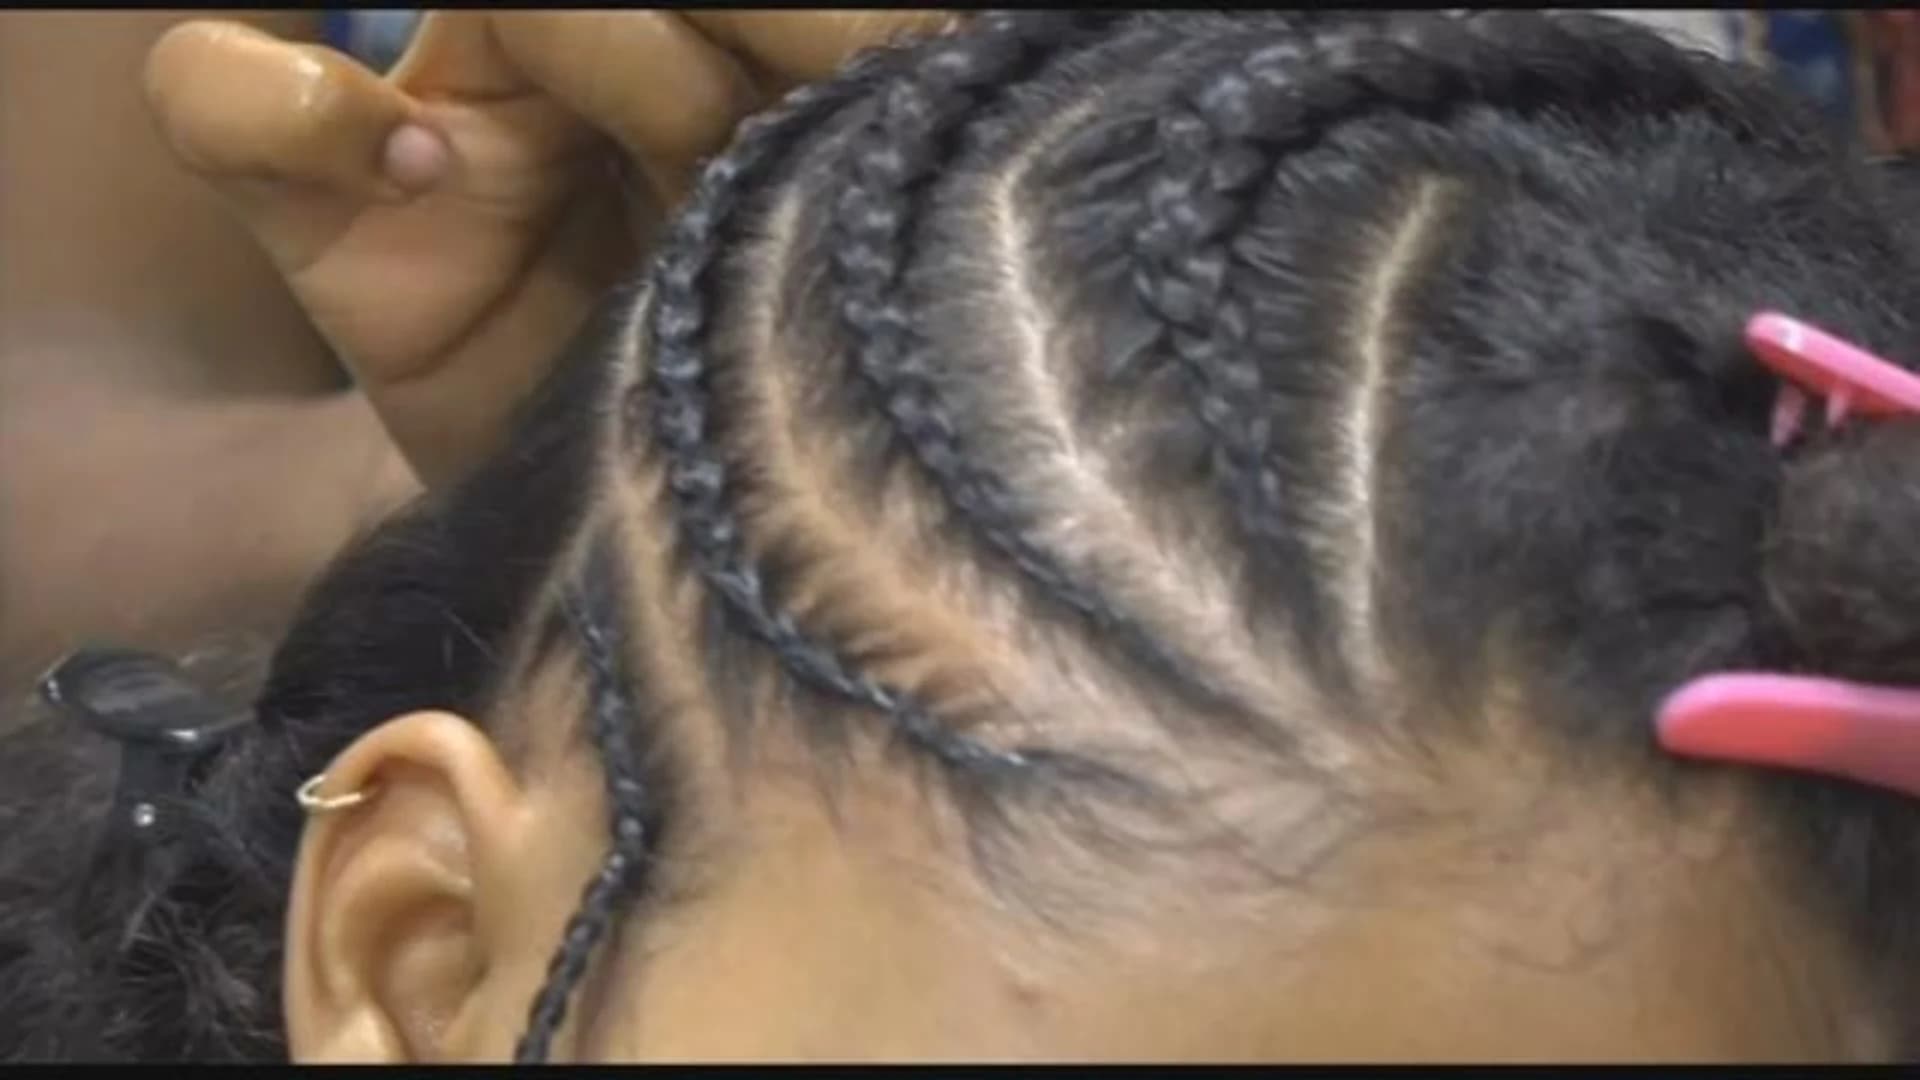 NYC commission outlaws discrimination based on hair, hairstyles